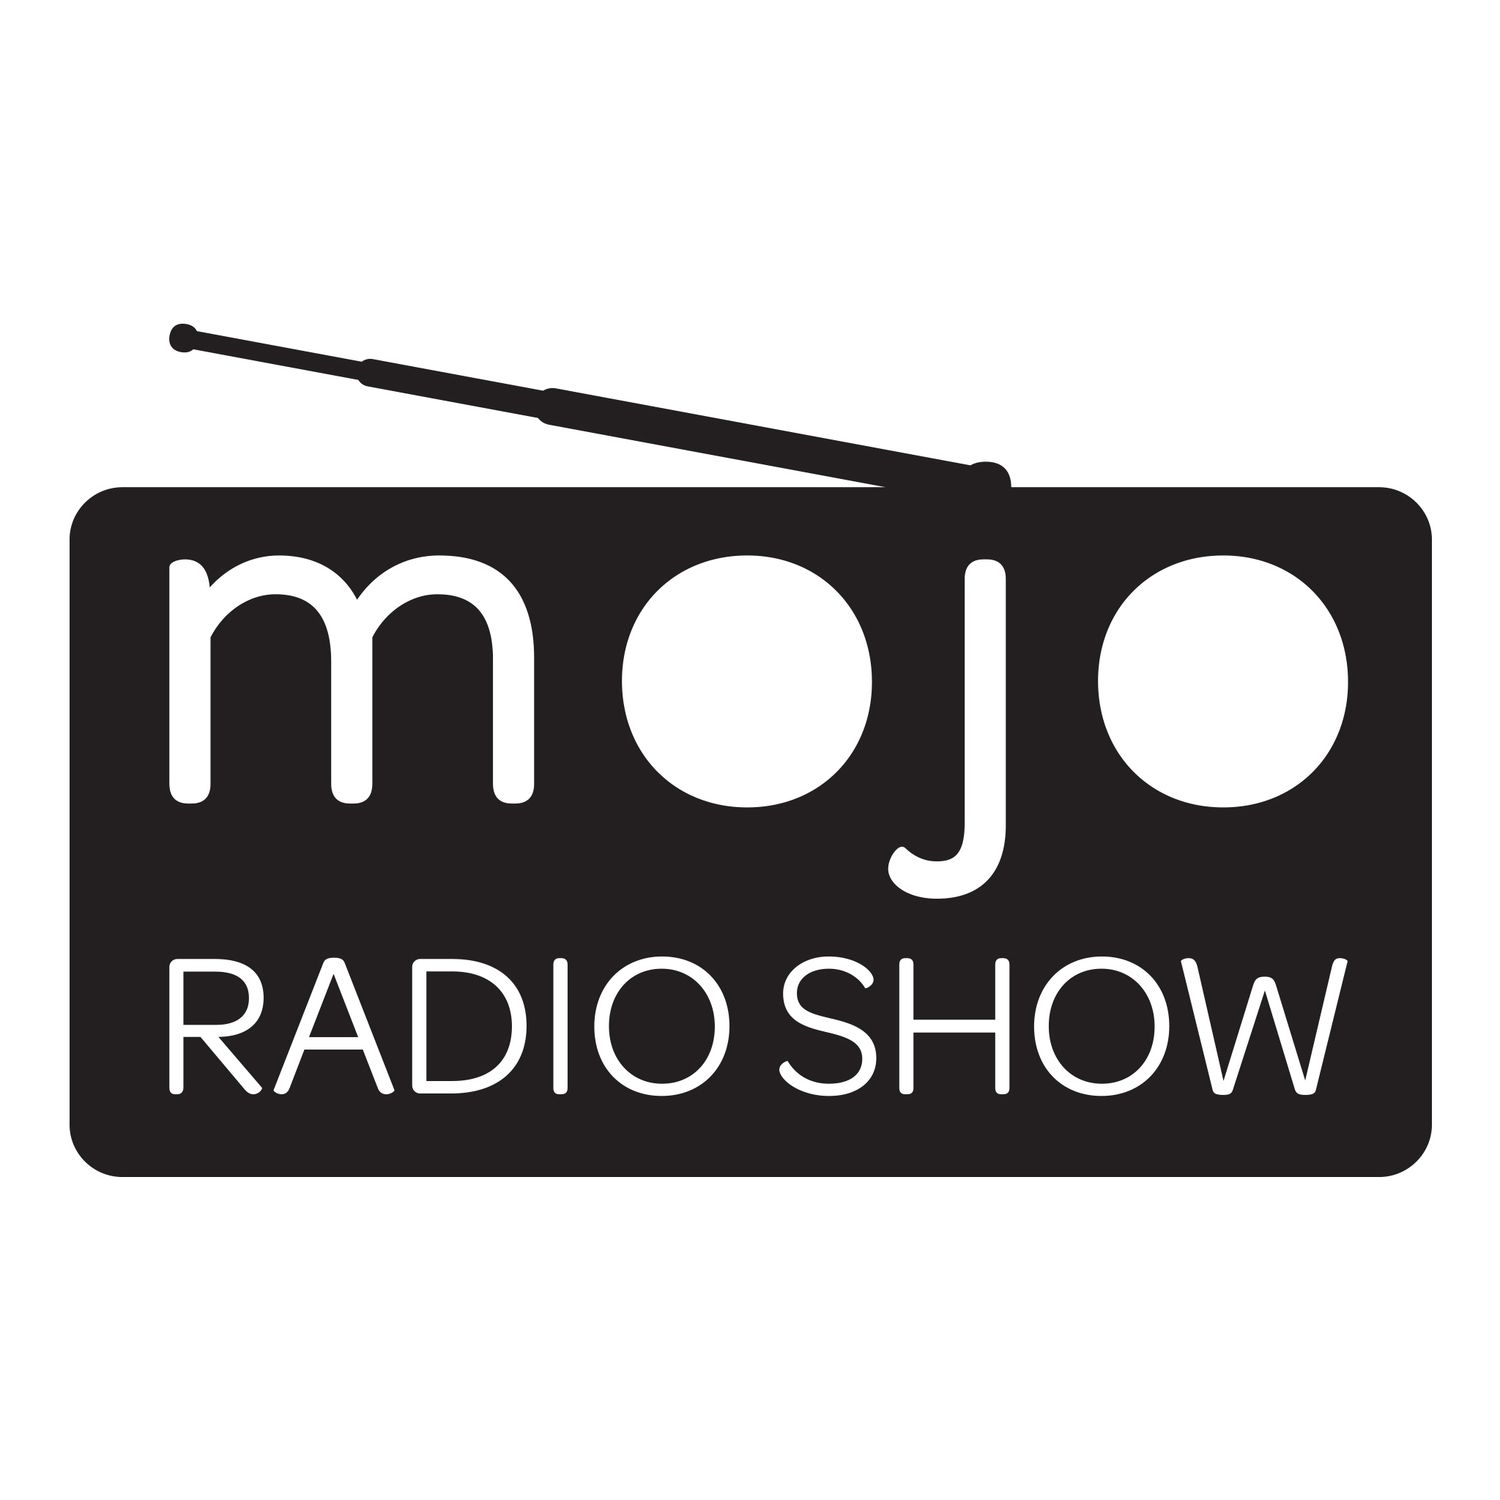 The Mojo Radio Show EP 181: Overcome Your Challenges, Achieve Your Dreams, Do A Day - Bryan Falchuk